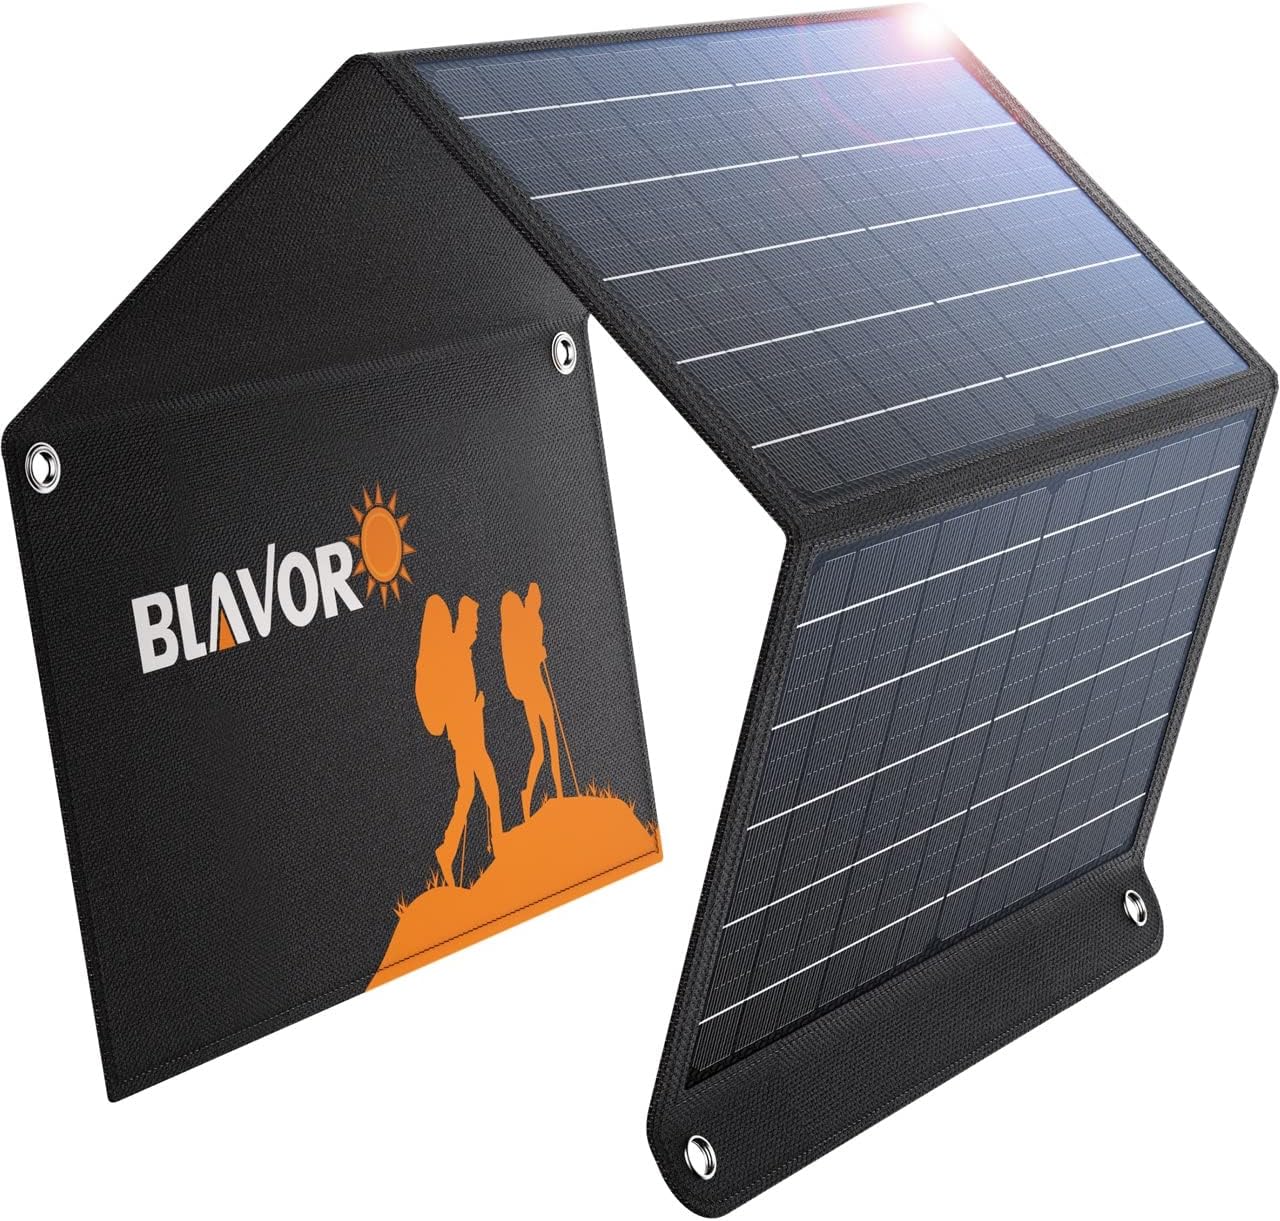 [Upgraded] BLAVOR 30W Solar Charger Review